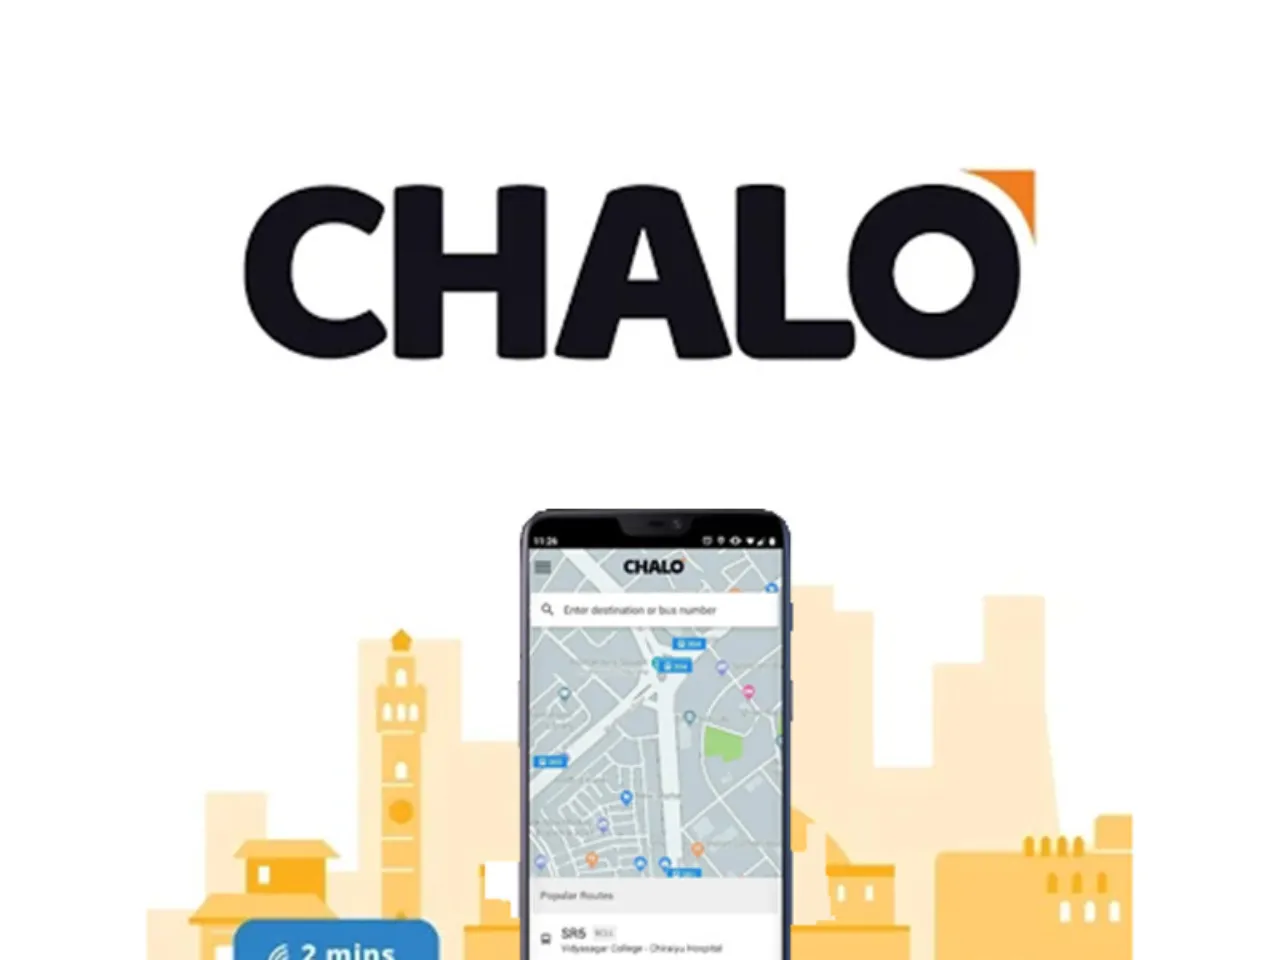 Bus tracking and ticketing startup Chalo raises $20M led by Avataar Ventures